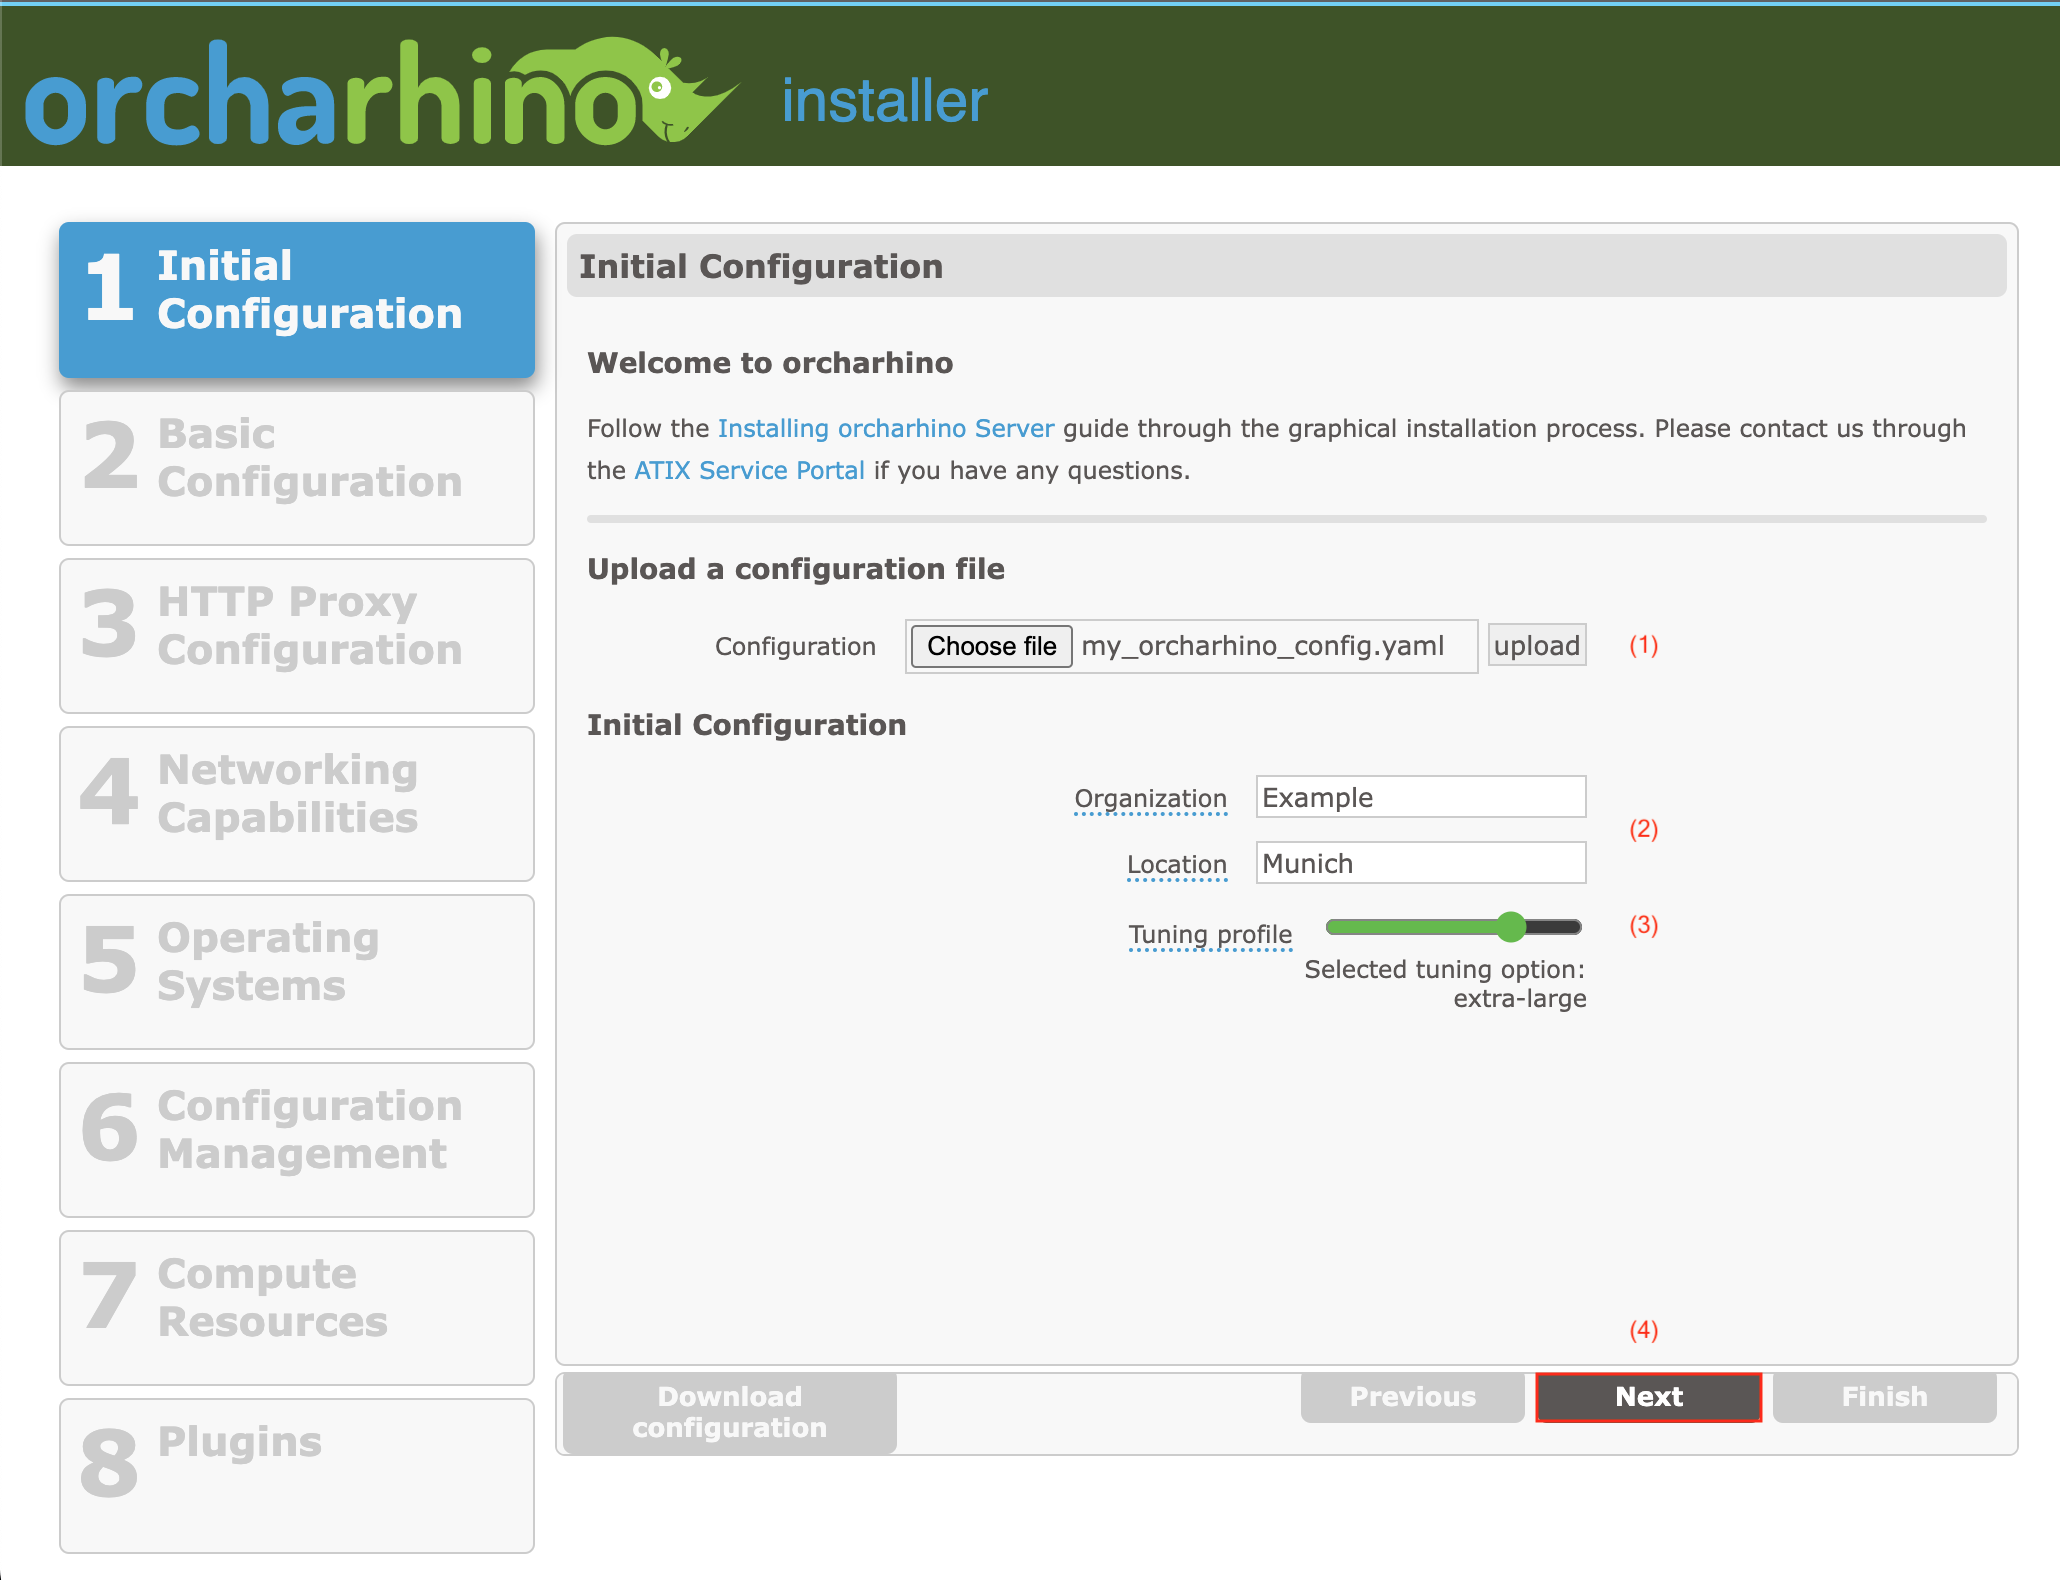 Setting initial configuration in orcharhino Installer GUI